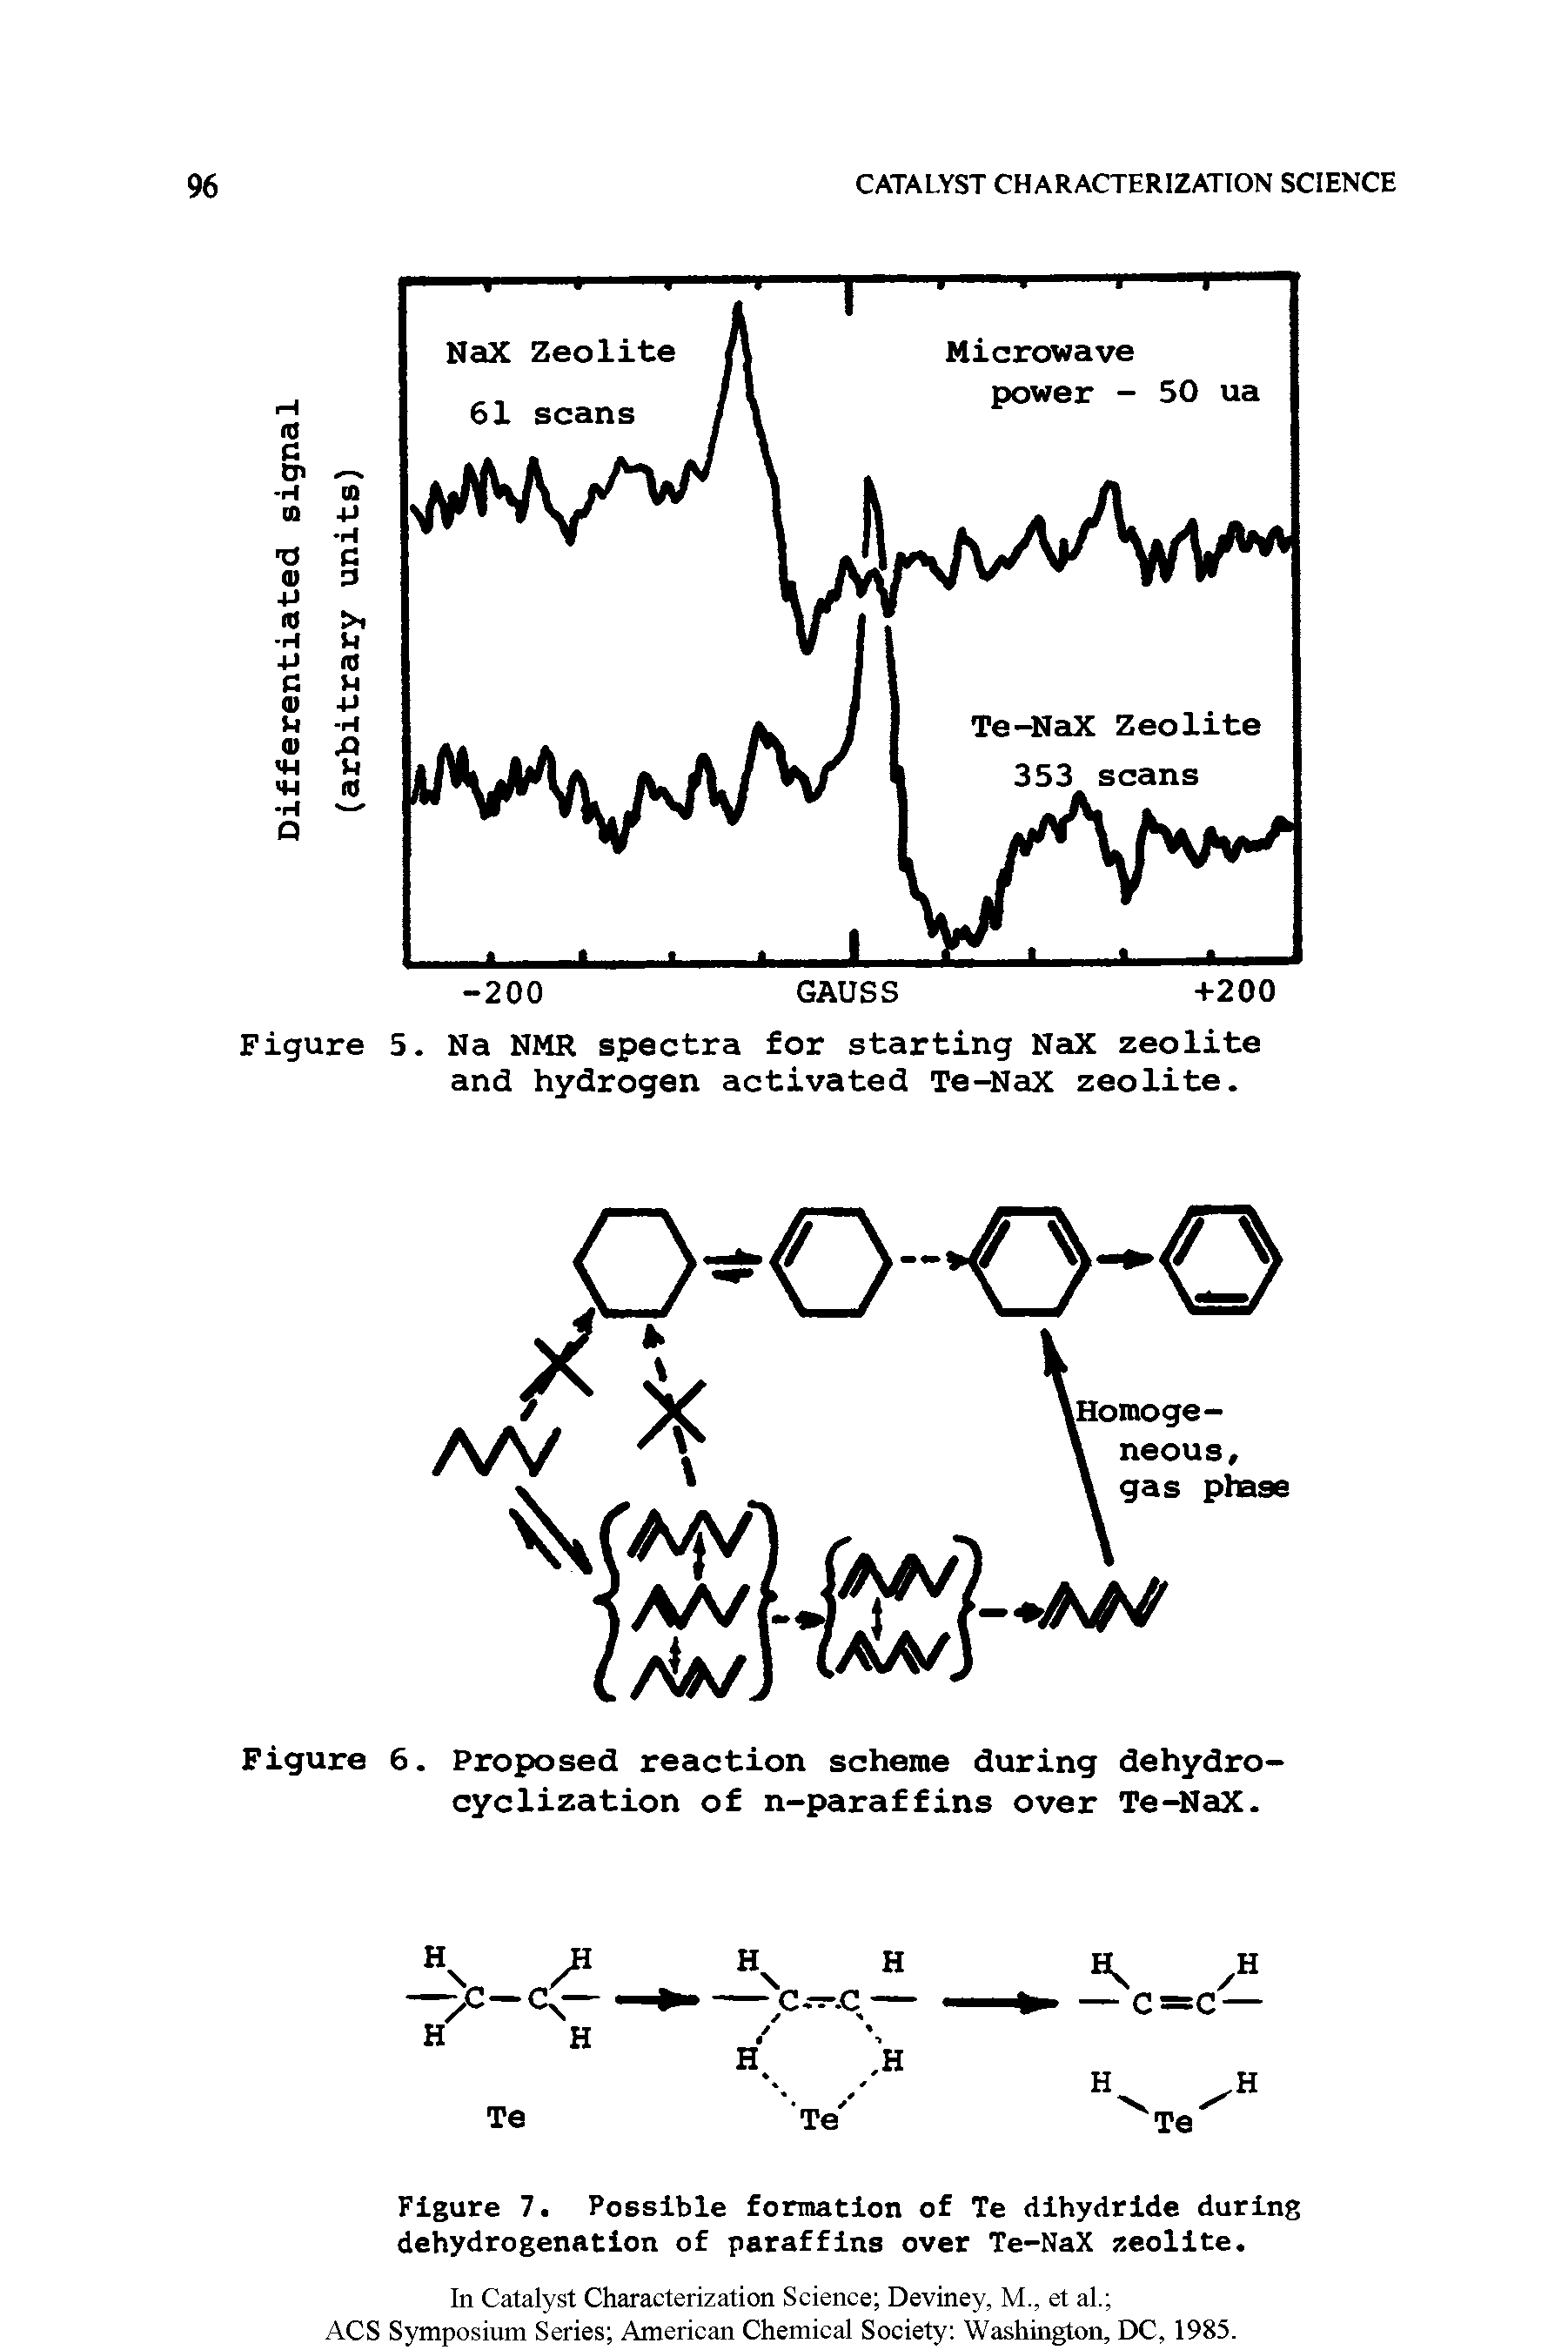 Figure 5. Na NMR spectra for starting NaX zeolite and hydrogen activated Te-NaX zeolite.